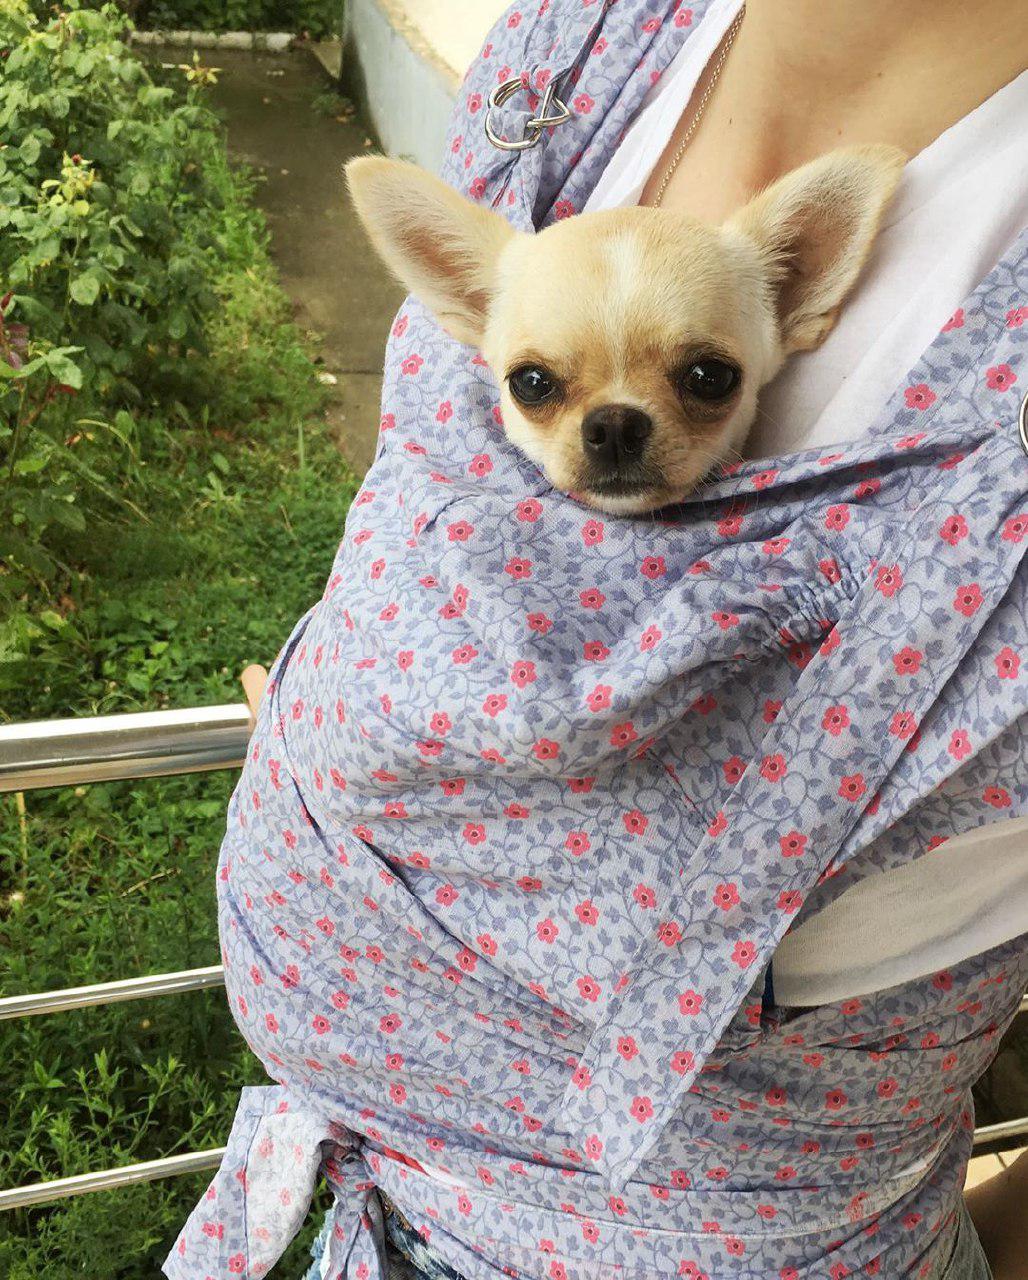 A Chihuahua in a baby body carrier in the balcony